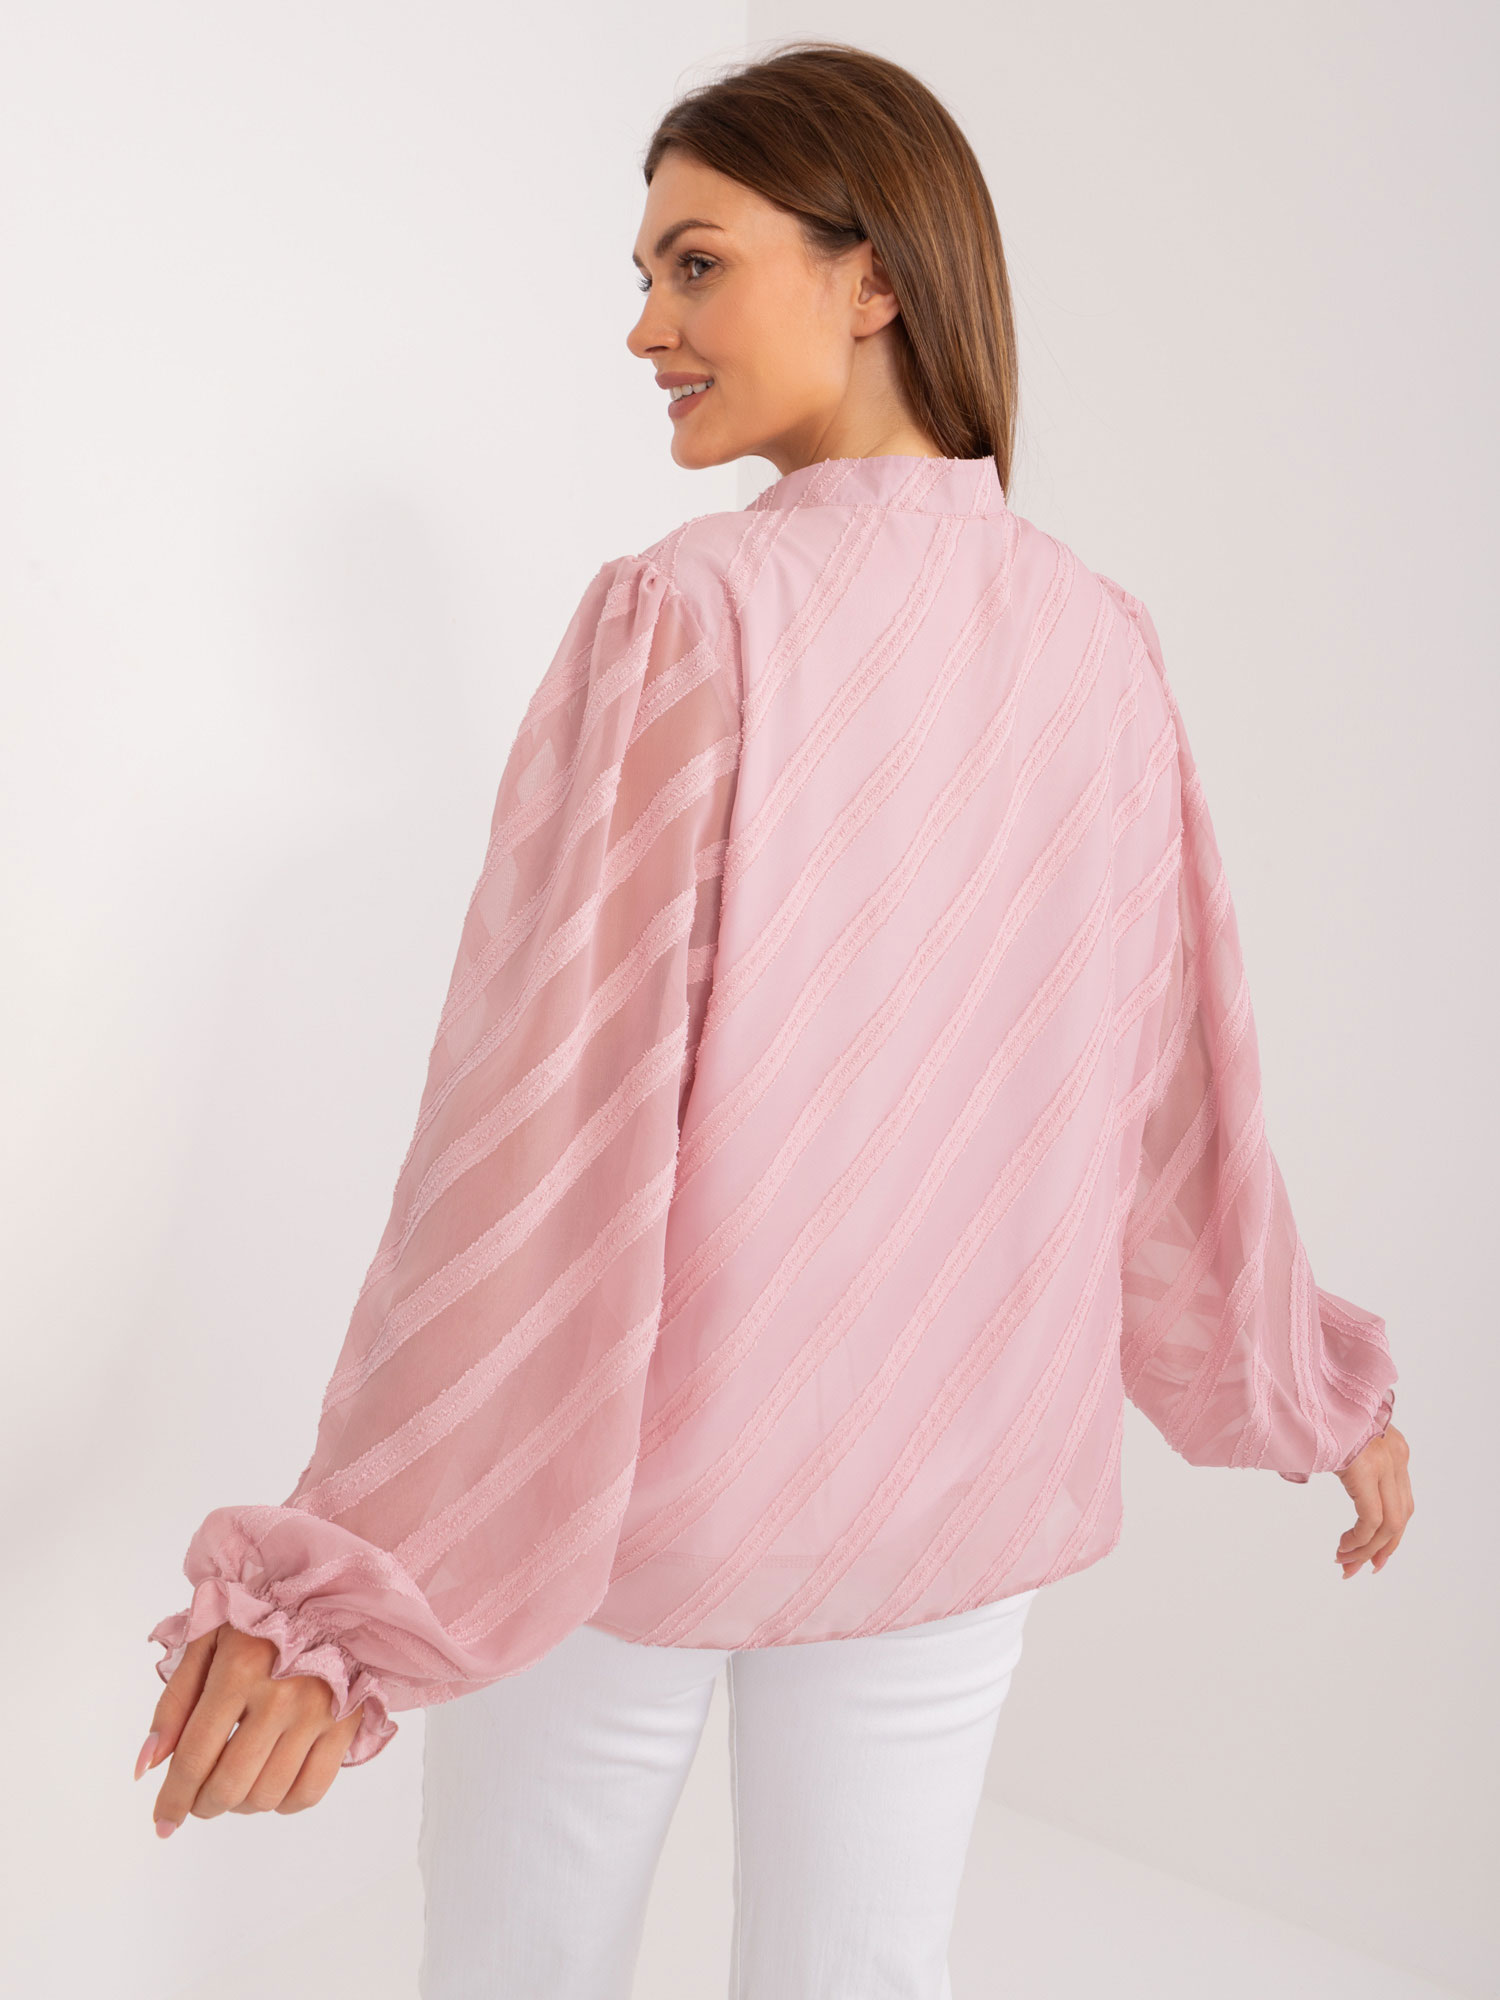 Pink classic shirt with puffy sleeves